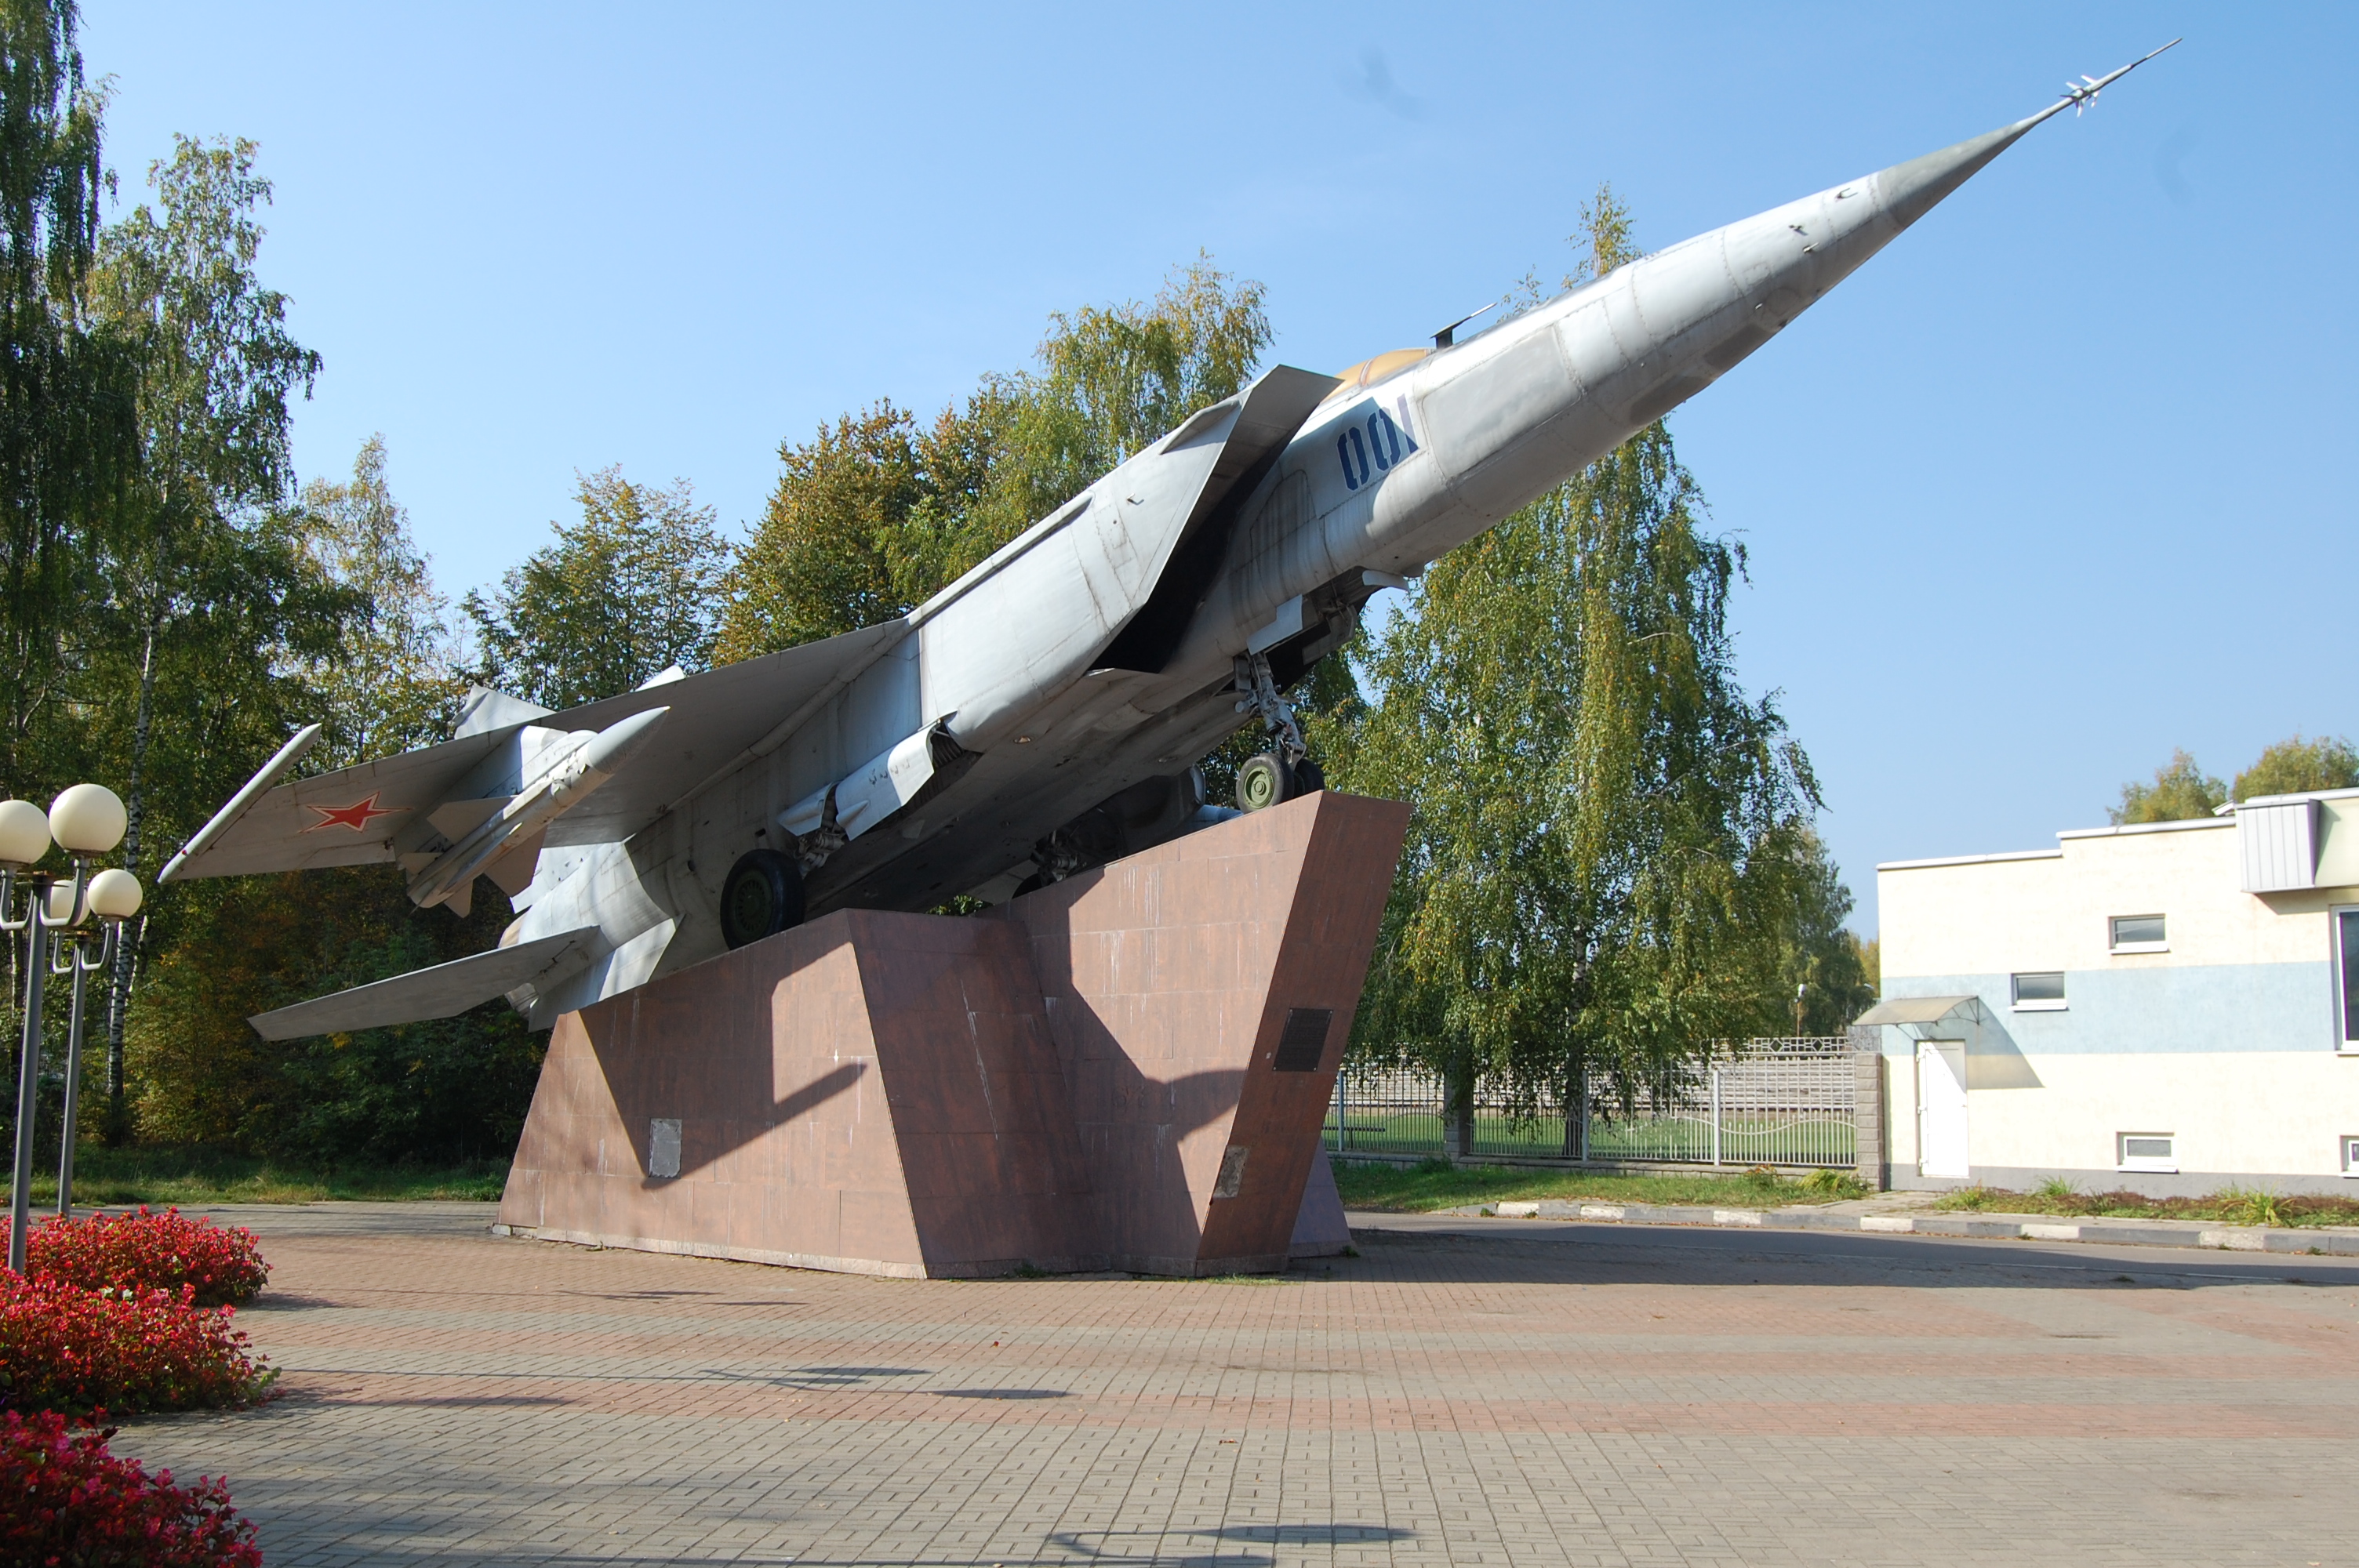 File:Dubna Monument Mikoyan-Gurevich MiG-25.JPG - Wikimedia Commons